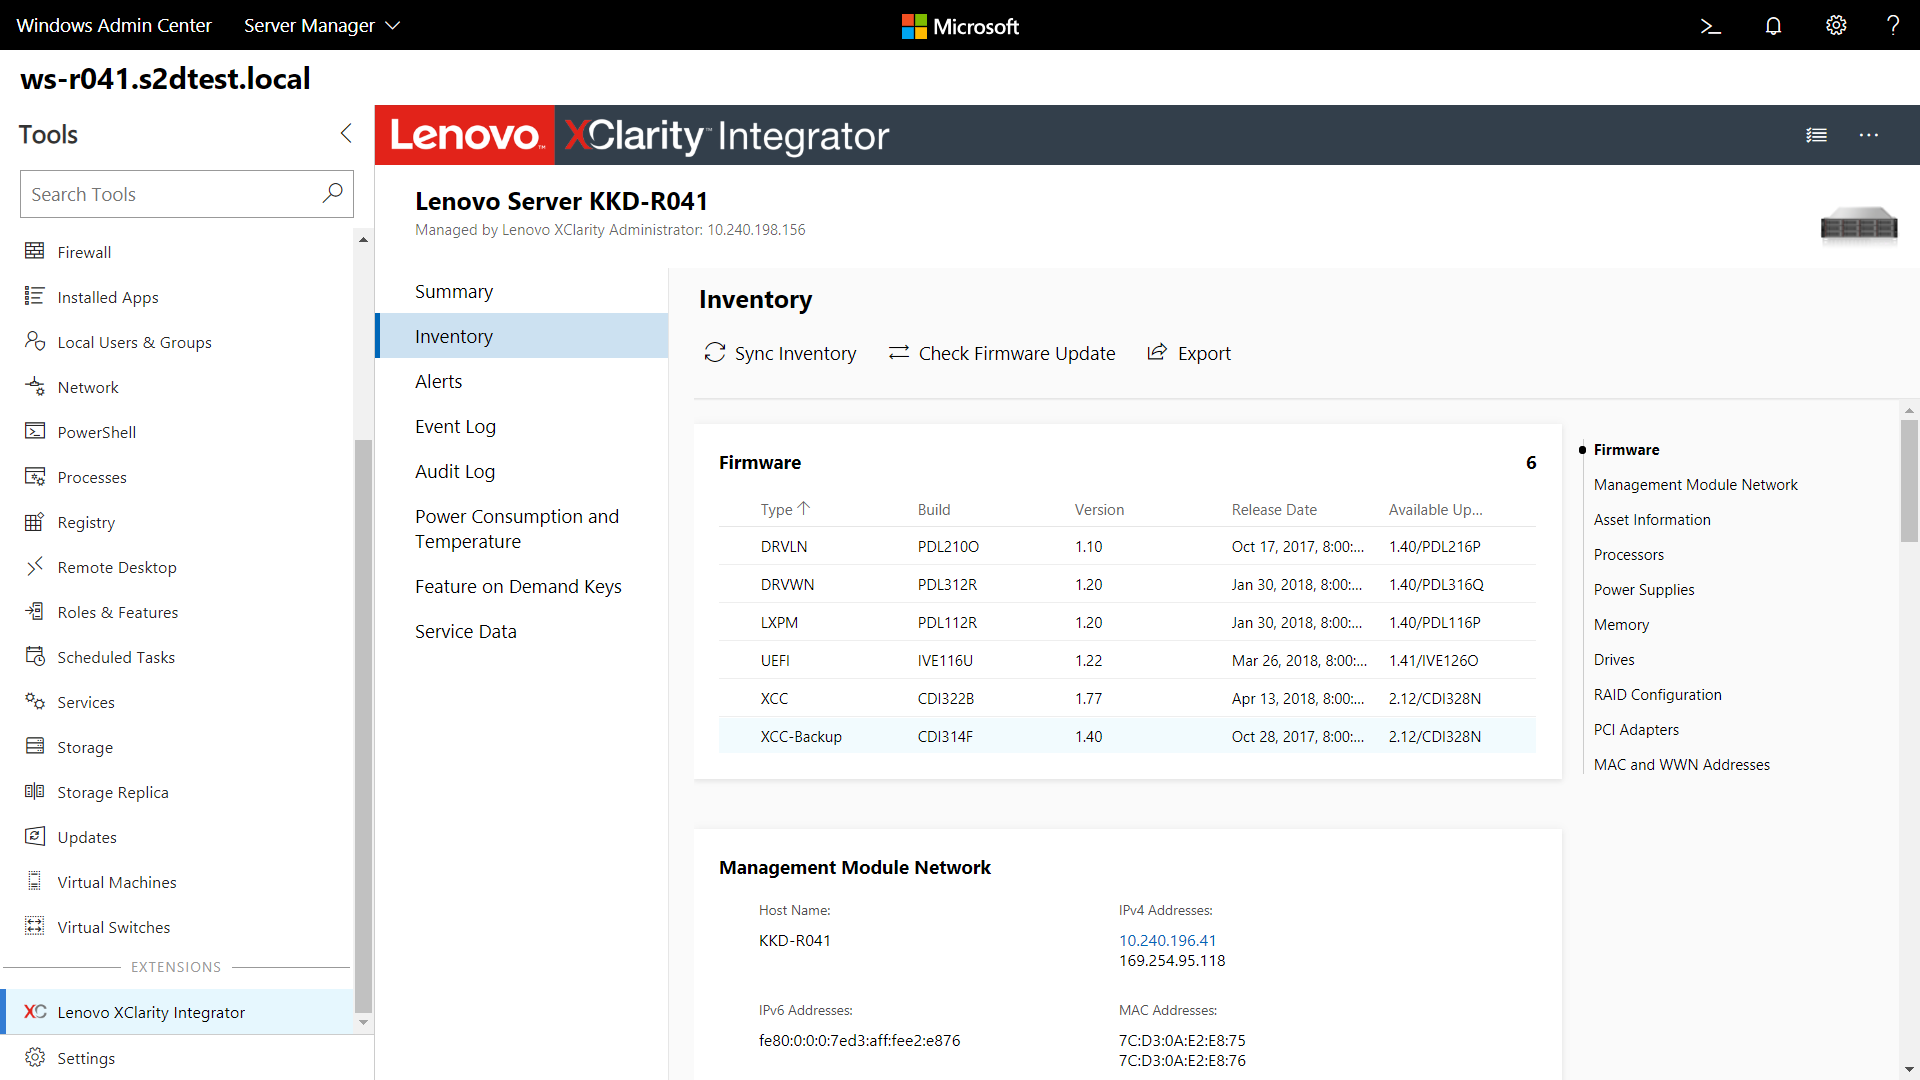 Screenshot of the Server Manager portal in Windows Admin Center showing the Lenovo XClarity Integrator extension tool.